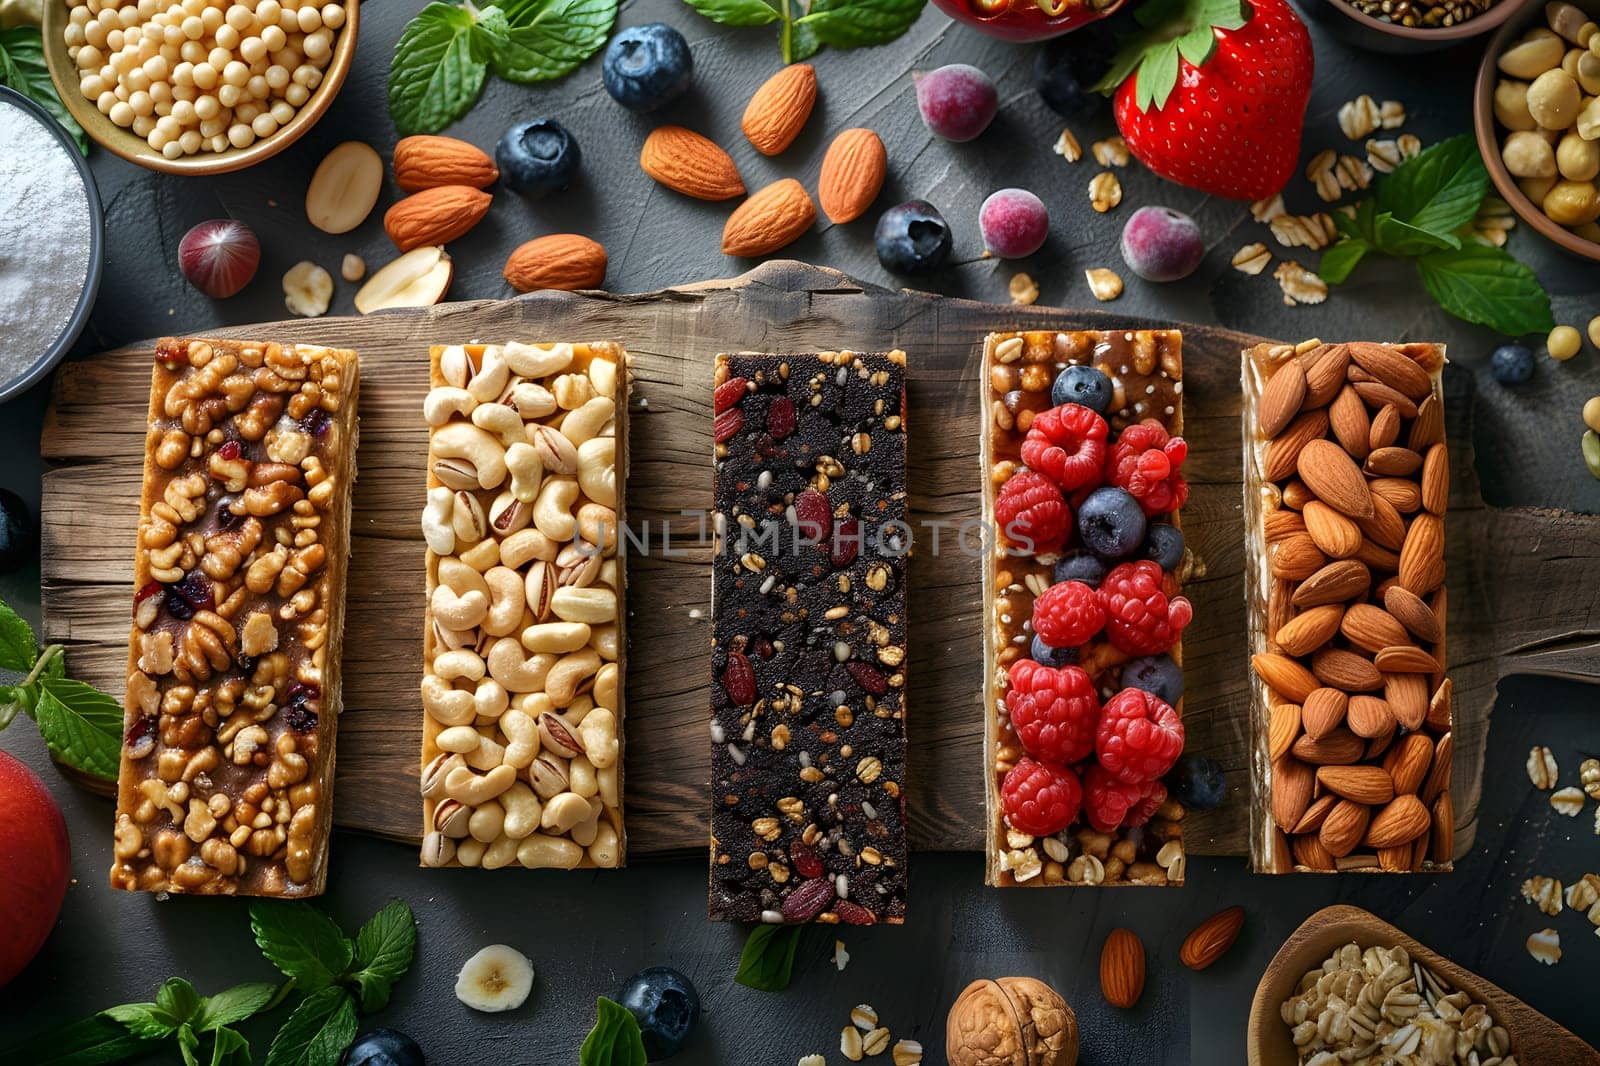 Various types of granola bars made with natural ingredients, a staple food filled with superfoods and whole foods, display on the table